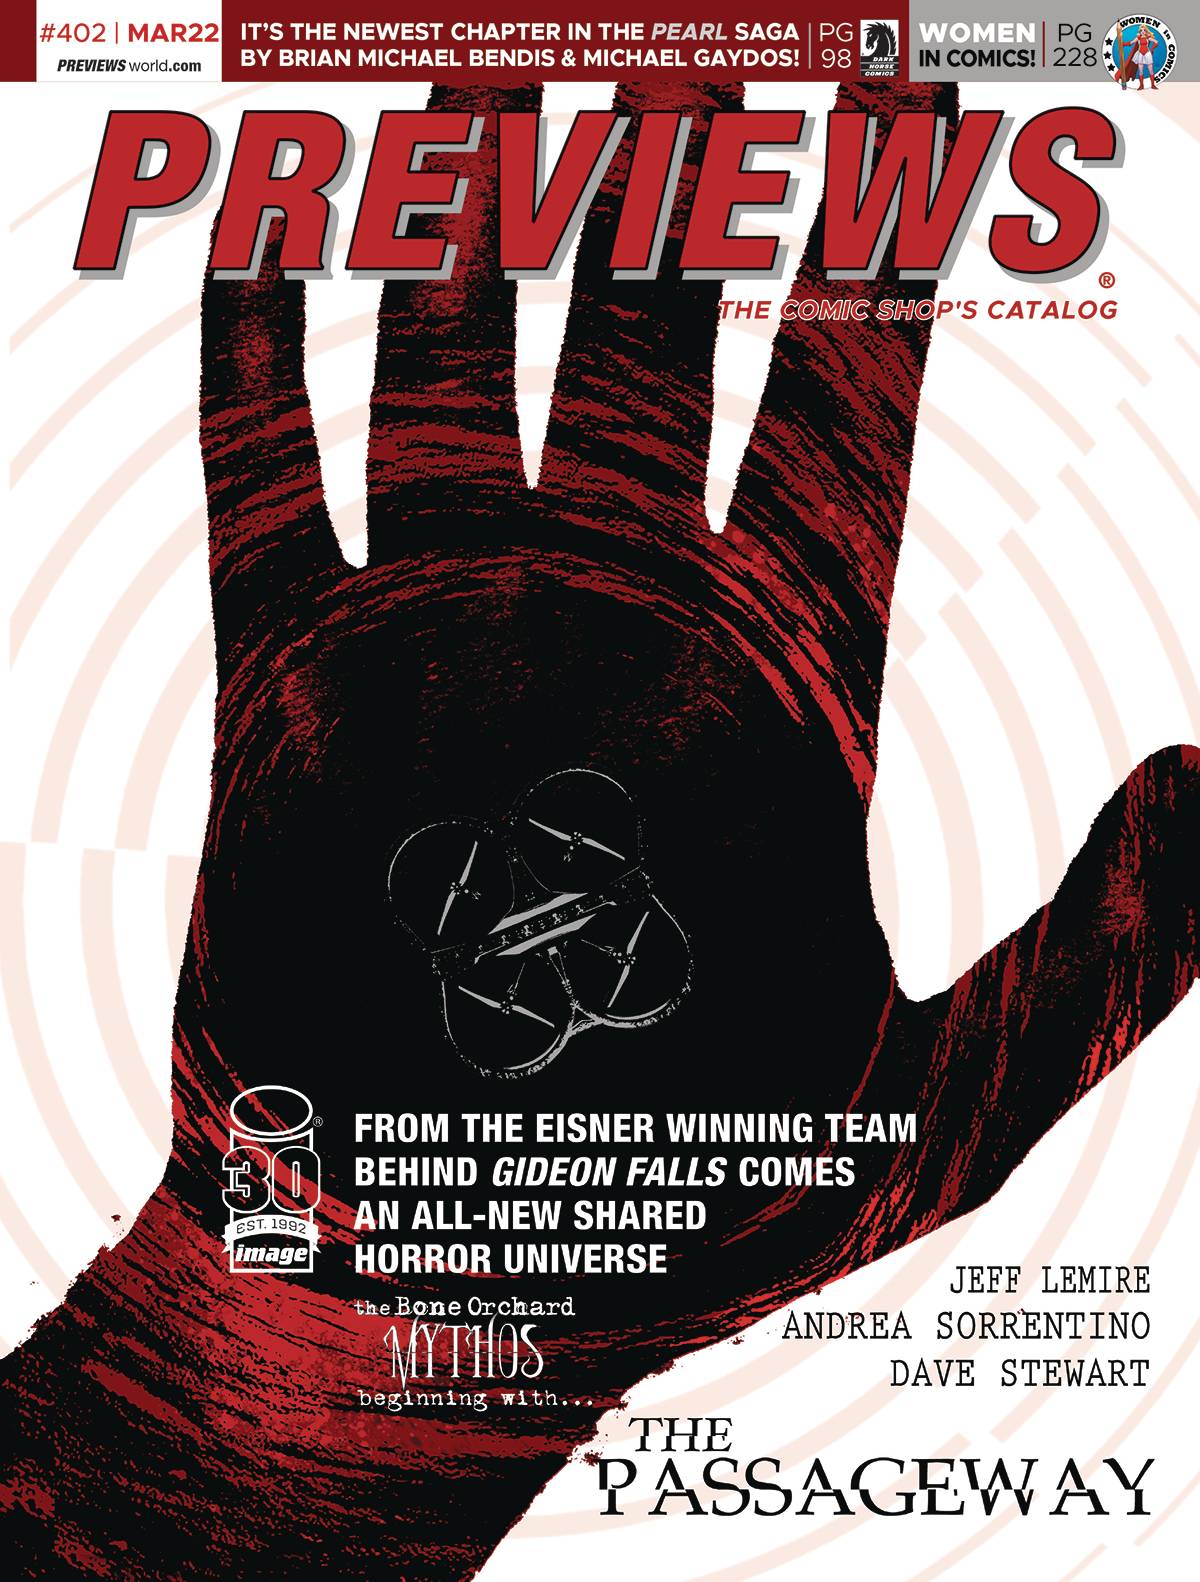 PREVIEWS #402 MARCH 2022